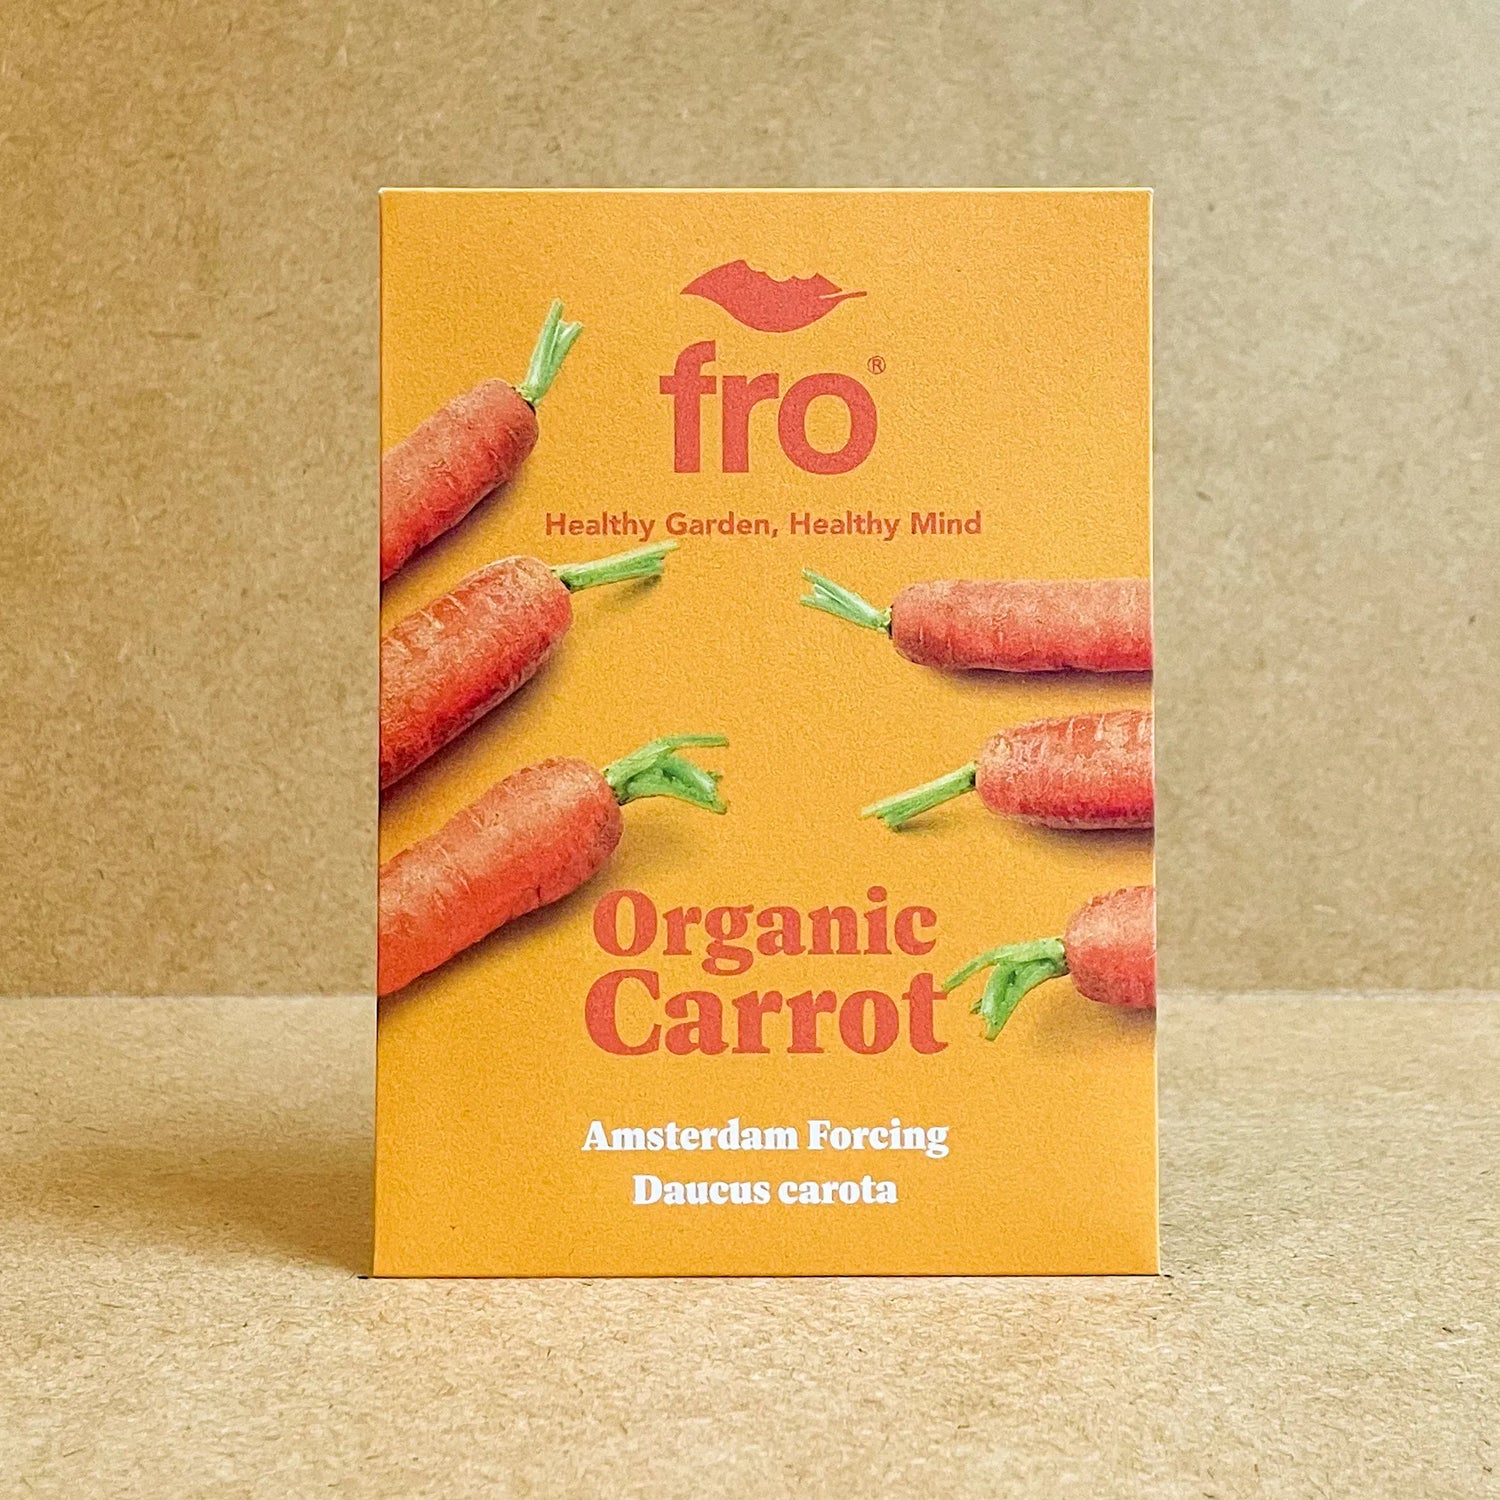 Carrot Amsterdam Forcing - Organic